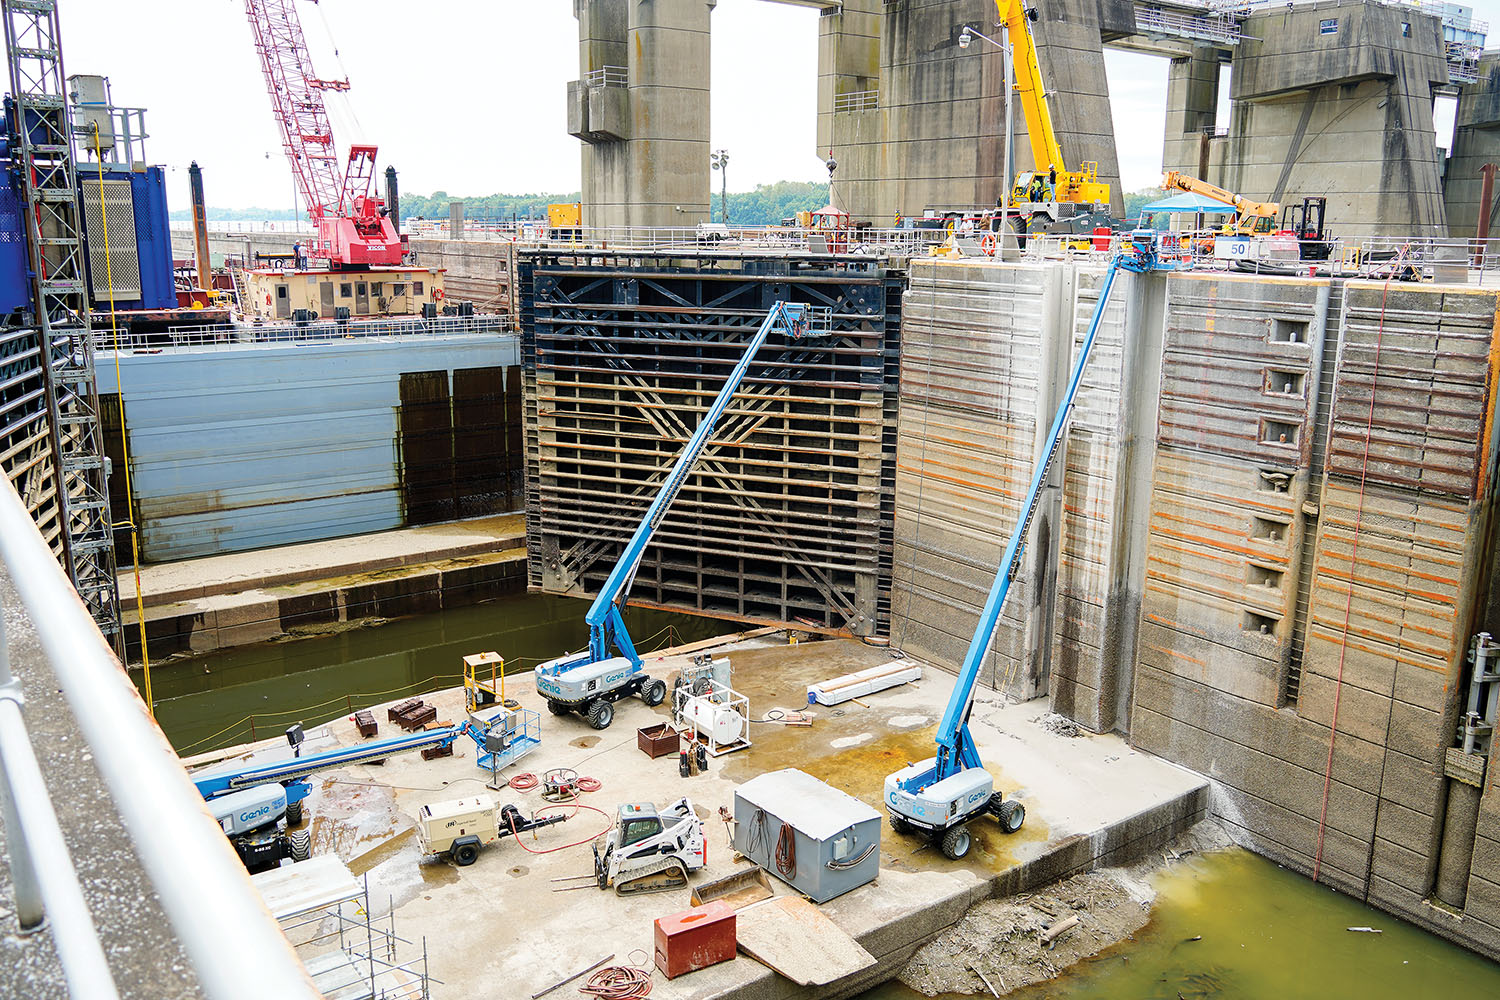 The Great Lakes and Ohio River Division’s Regional Rivers Repair Fleet work to rehab the miter gates in the 1,200-foot lock chamber at John T. Myers Locks and Dam in September. (Photo by Abby Korfhage, Louisville Engineer District)